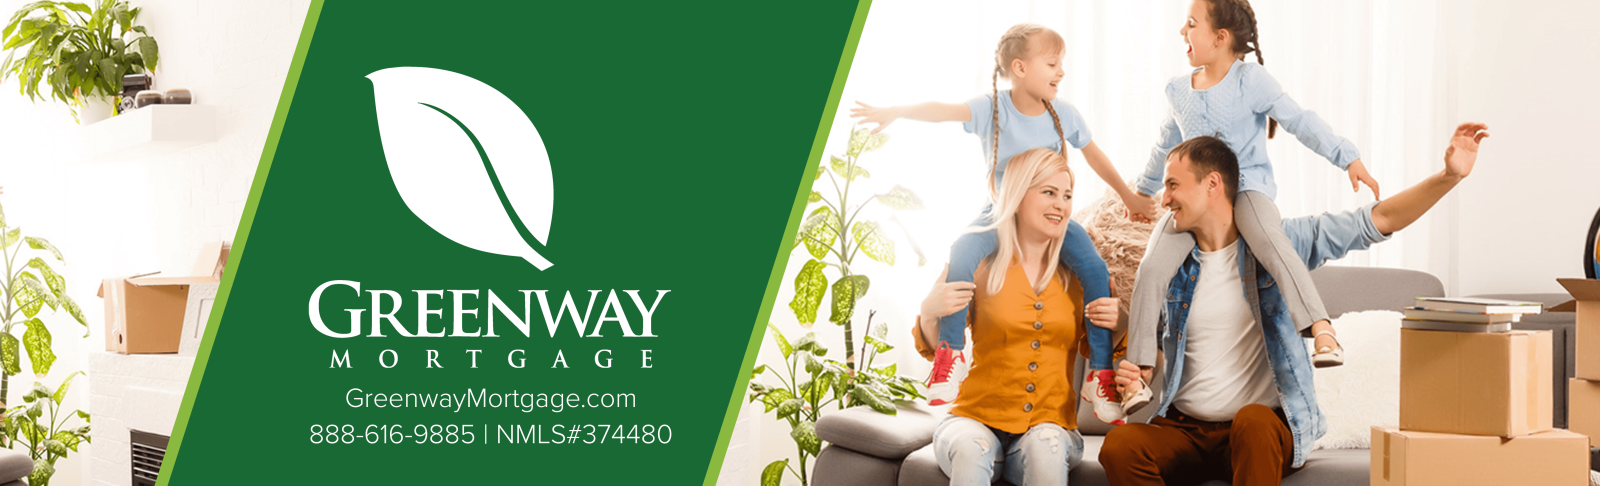 Contact Greenway Mortgage Funding Corp